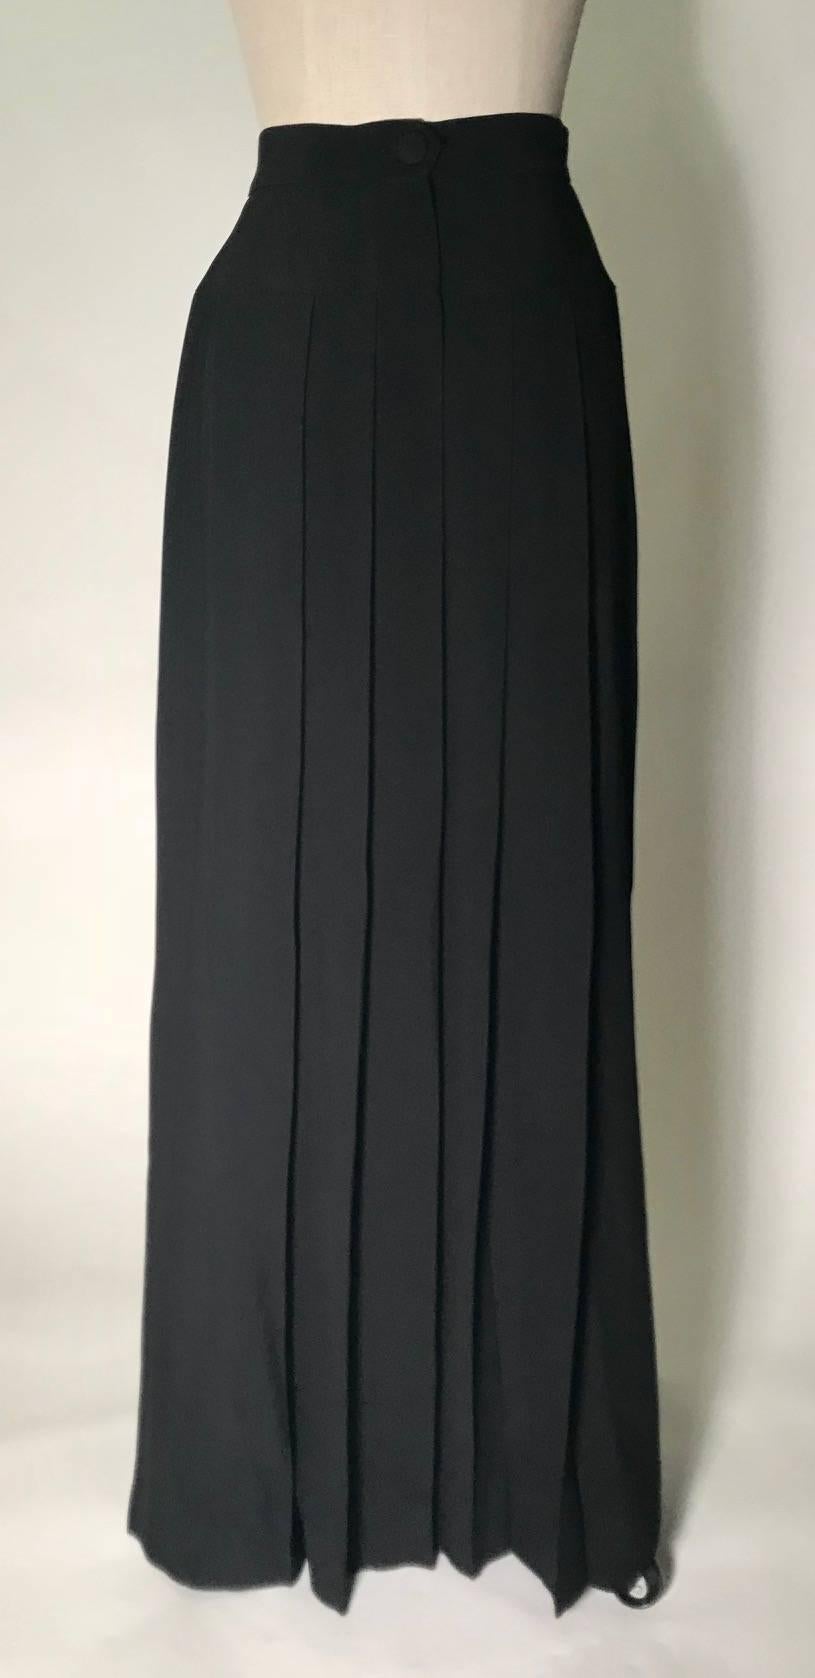 Moschino vintage 1990s black pleated maxi skirt embellished with gold embroidered musical notes. Zipper and button at back.

55% acetate, 45% rayon.

Made in Italy. 

Labelled size IT 42, US 8, but best fits a modern 2/4. See measurements.
Waist 26